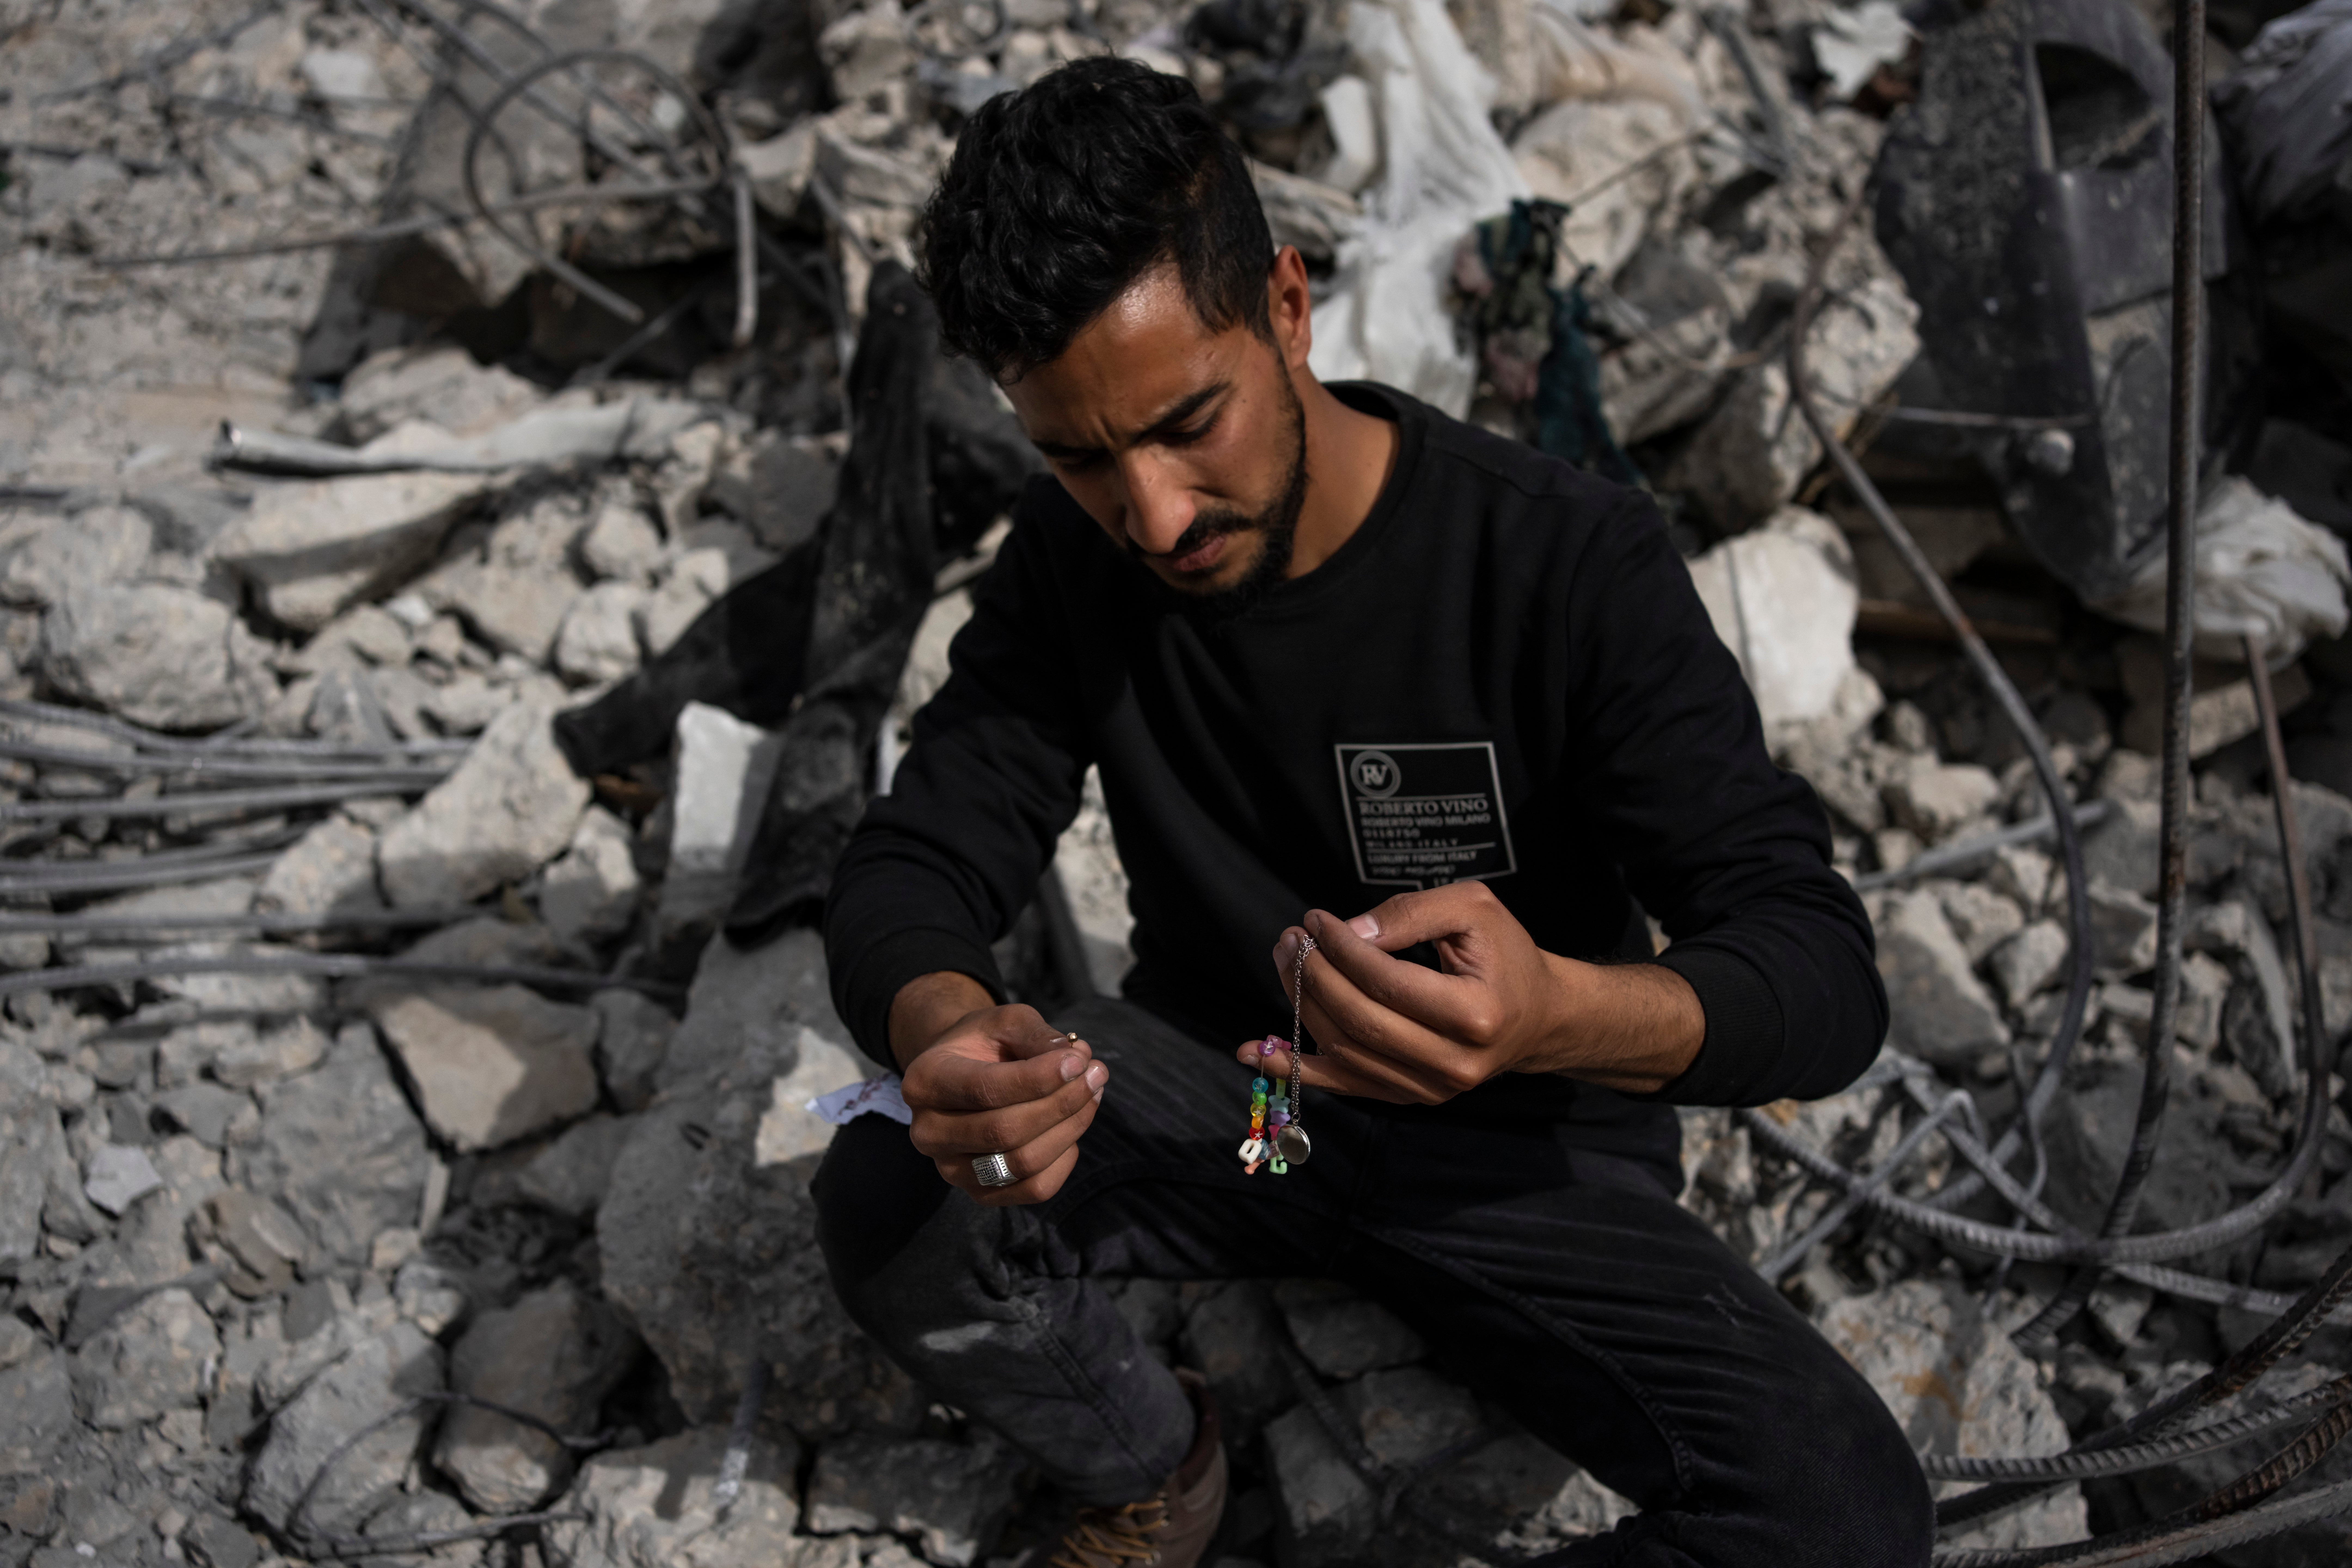 Ibrahim Hasouna, center, the sole survivor among his family, sits amidst the debris of his bombed home in Rafa